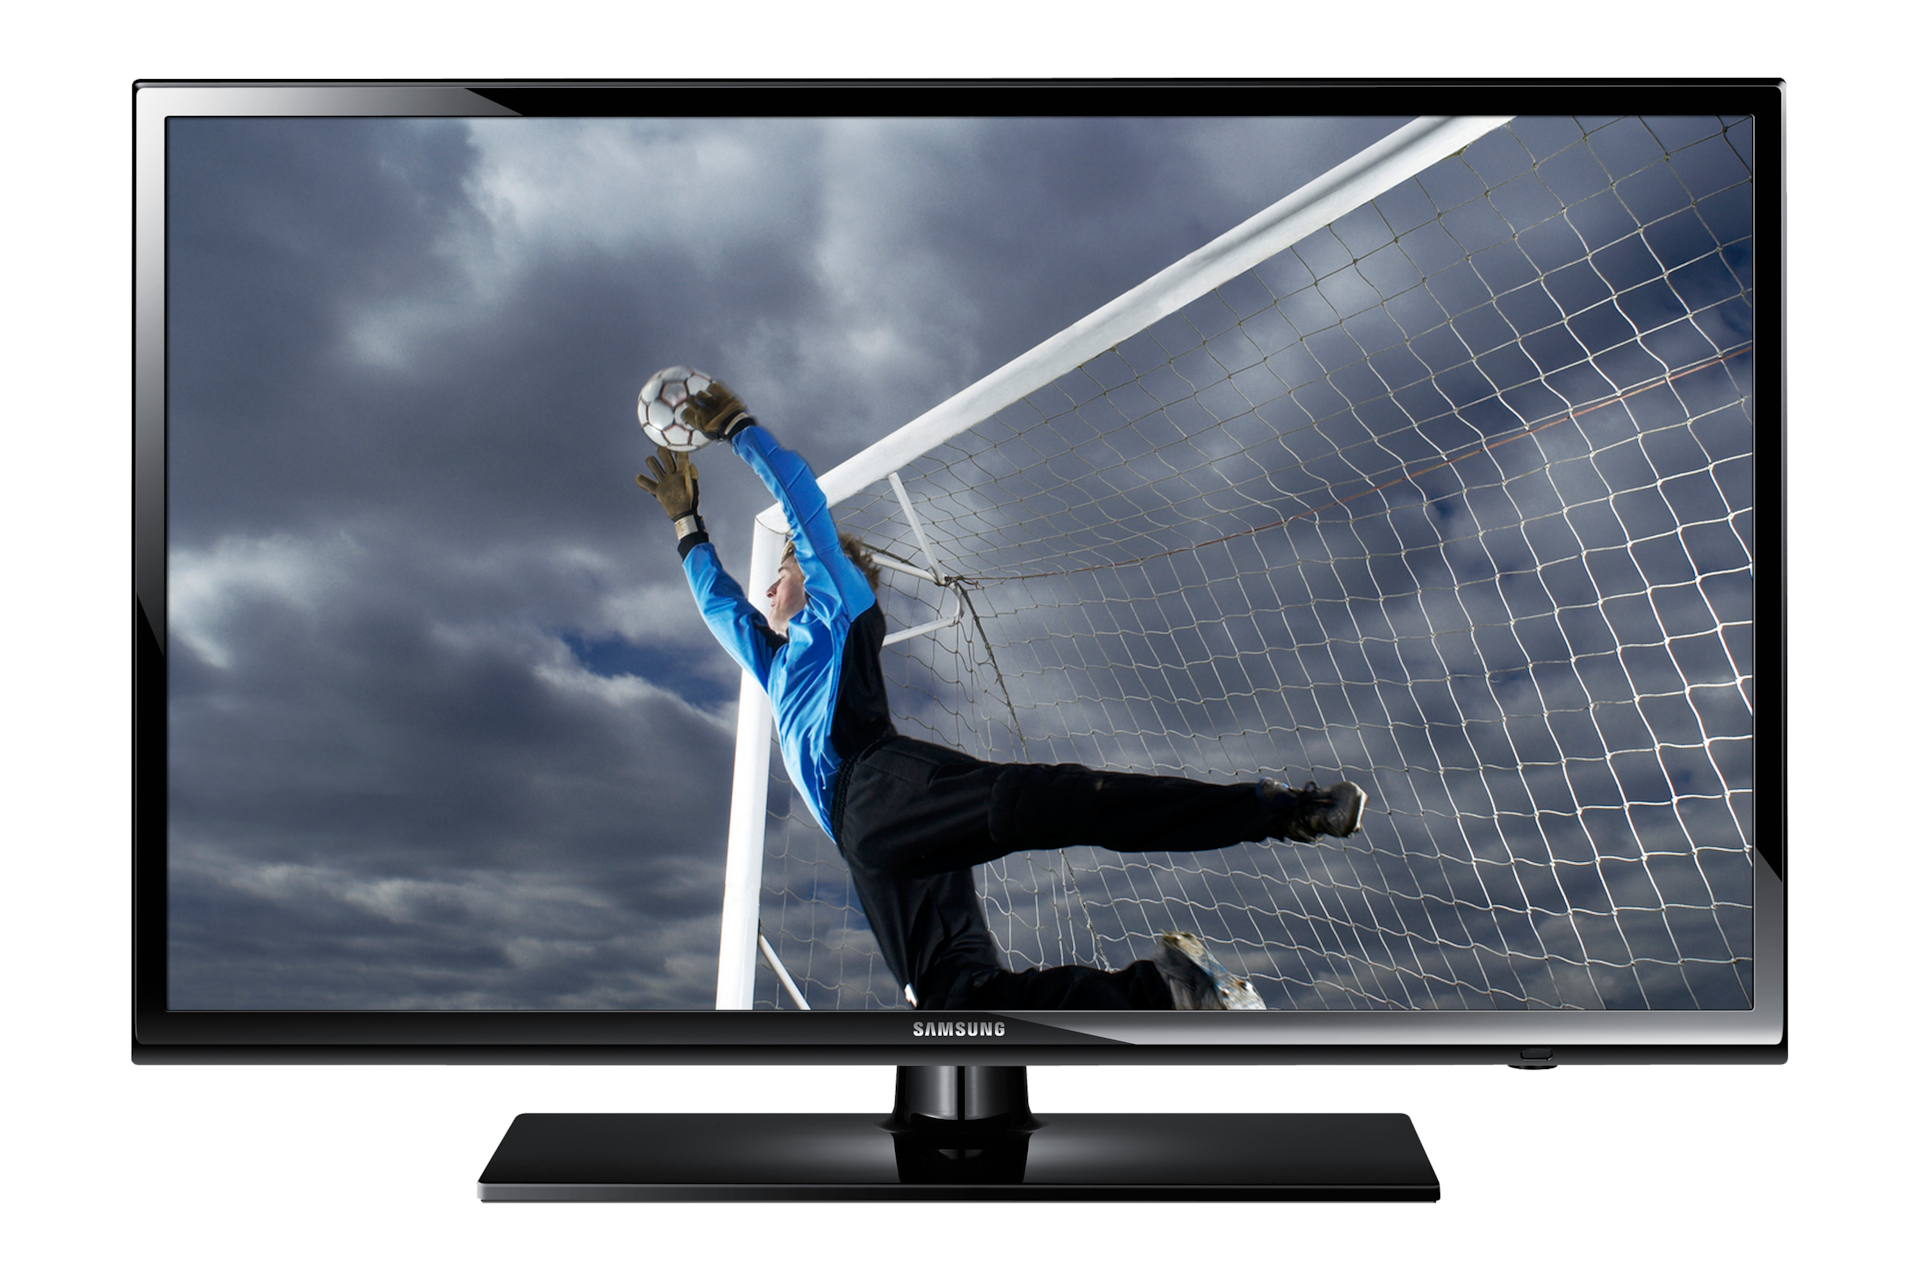 Samsung Latest 32 Inch HD LED TV Price, USB TV Features, Specifications